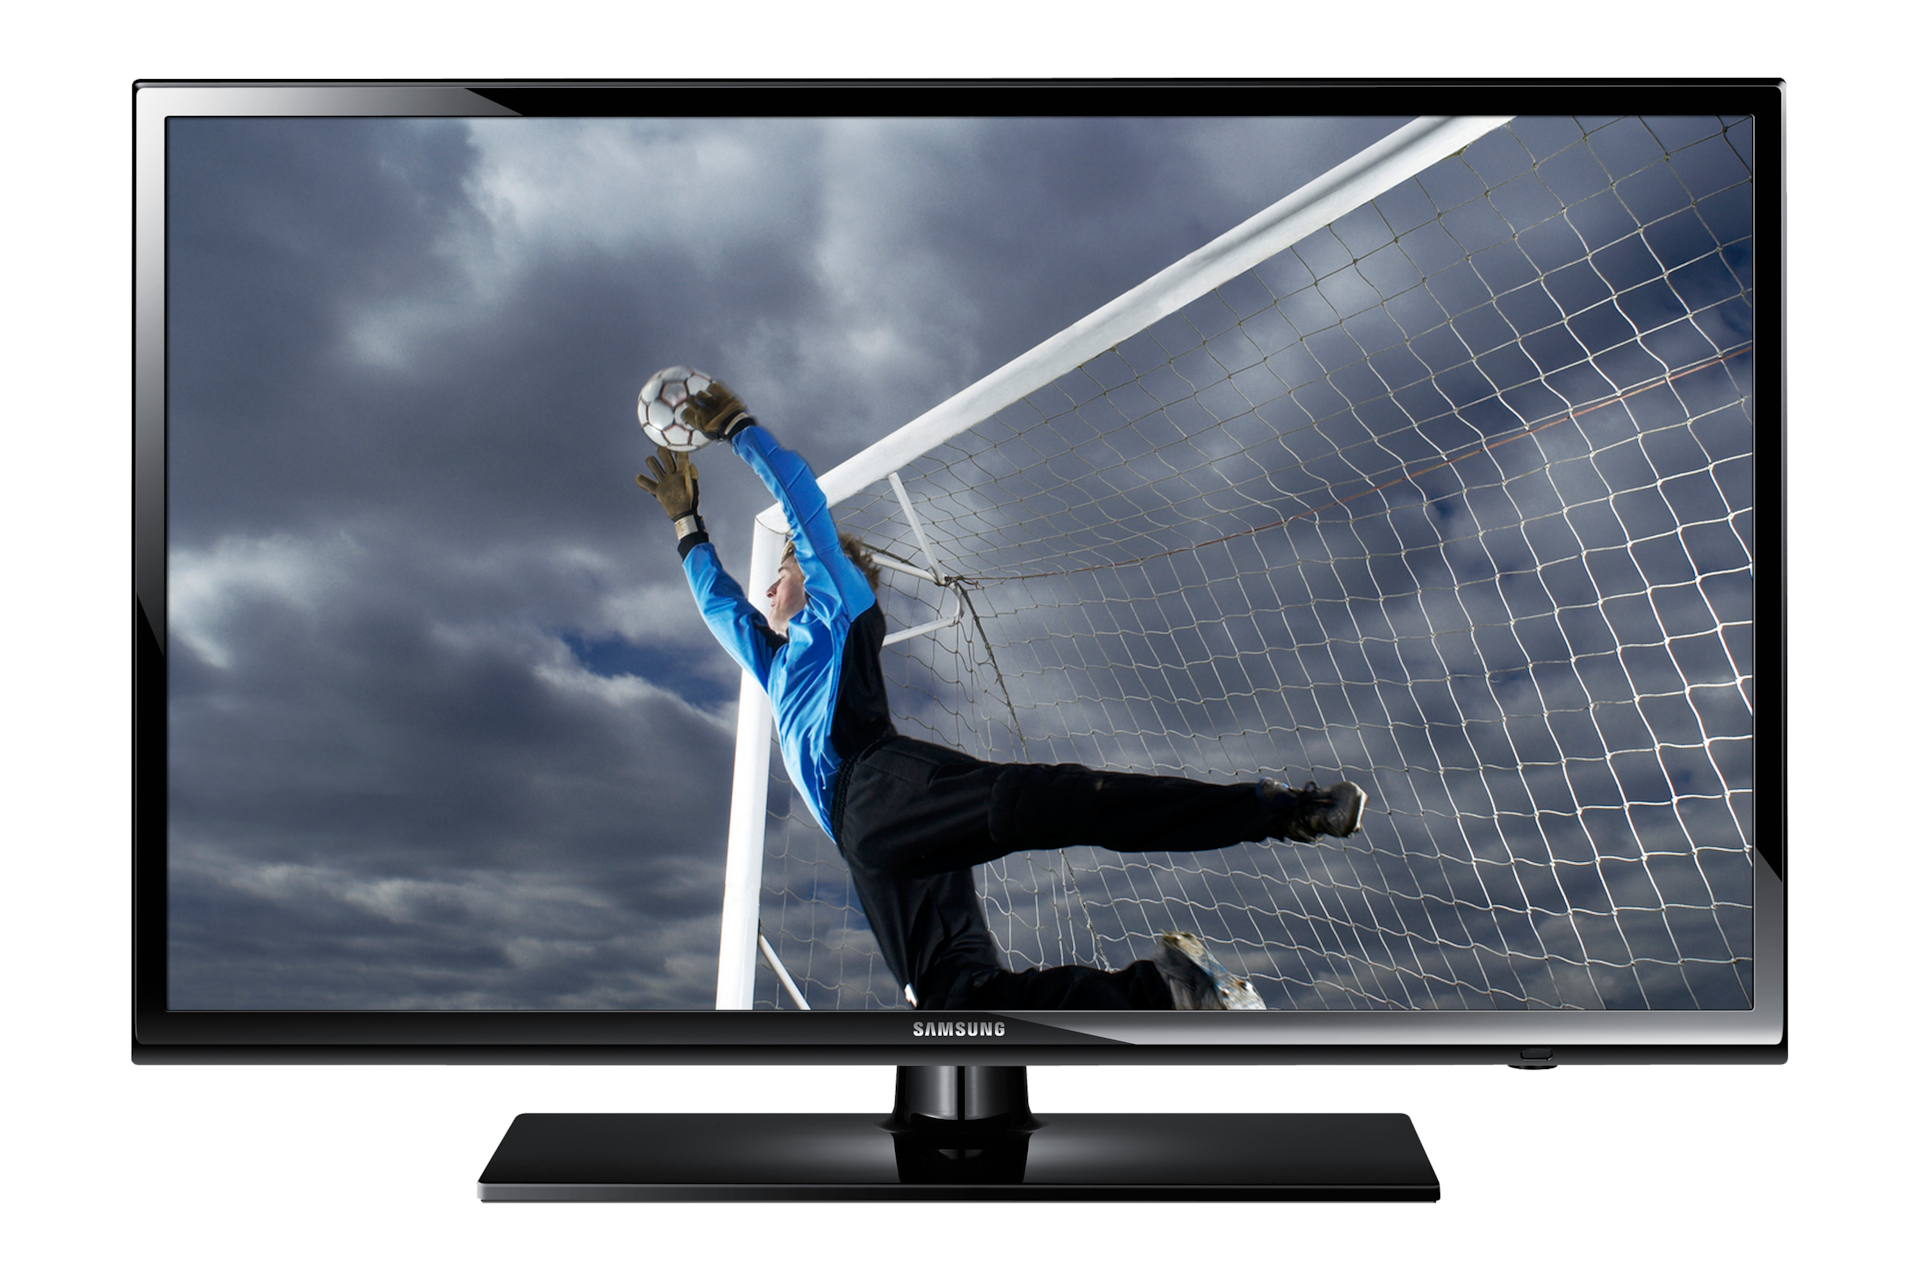 Samsung Latest 32 Inch HD LED TV Price, USB TV Features, Specifications